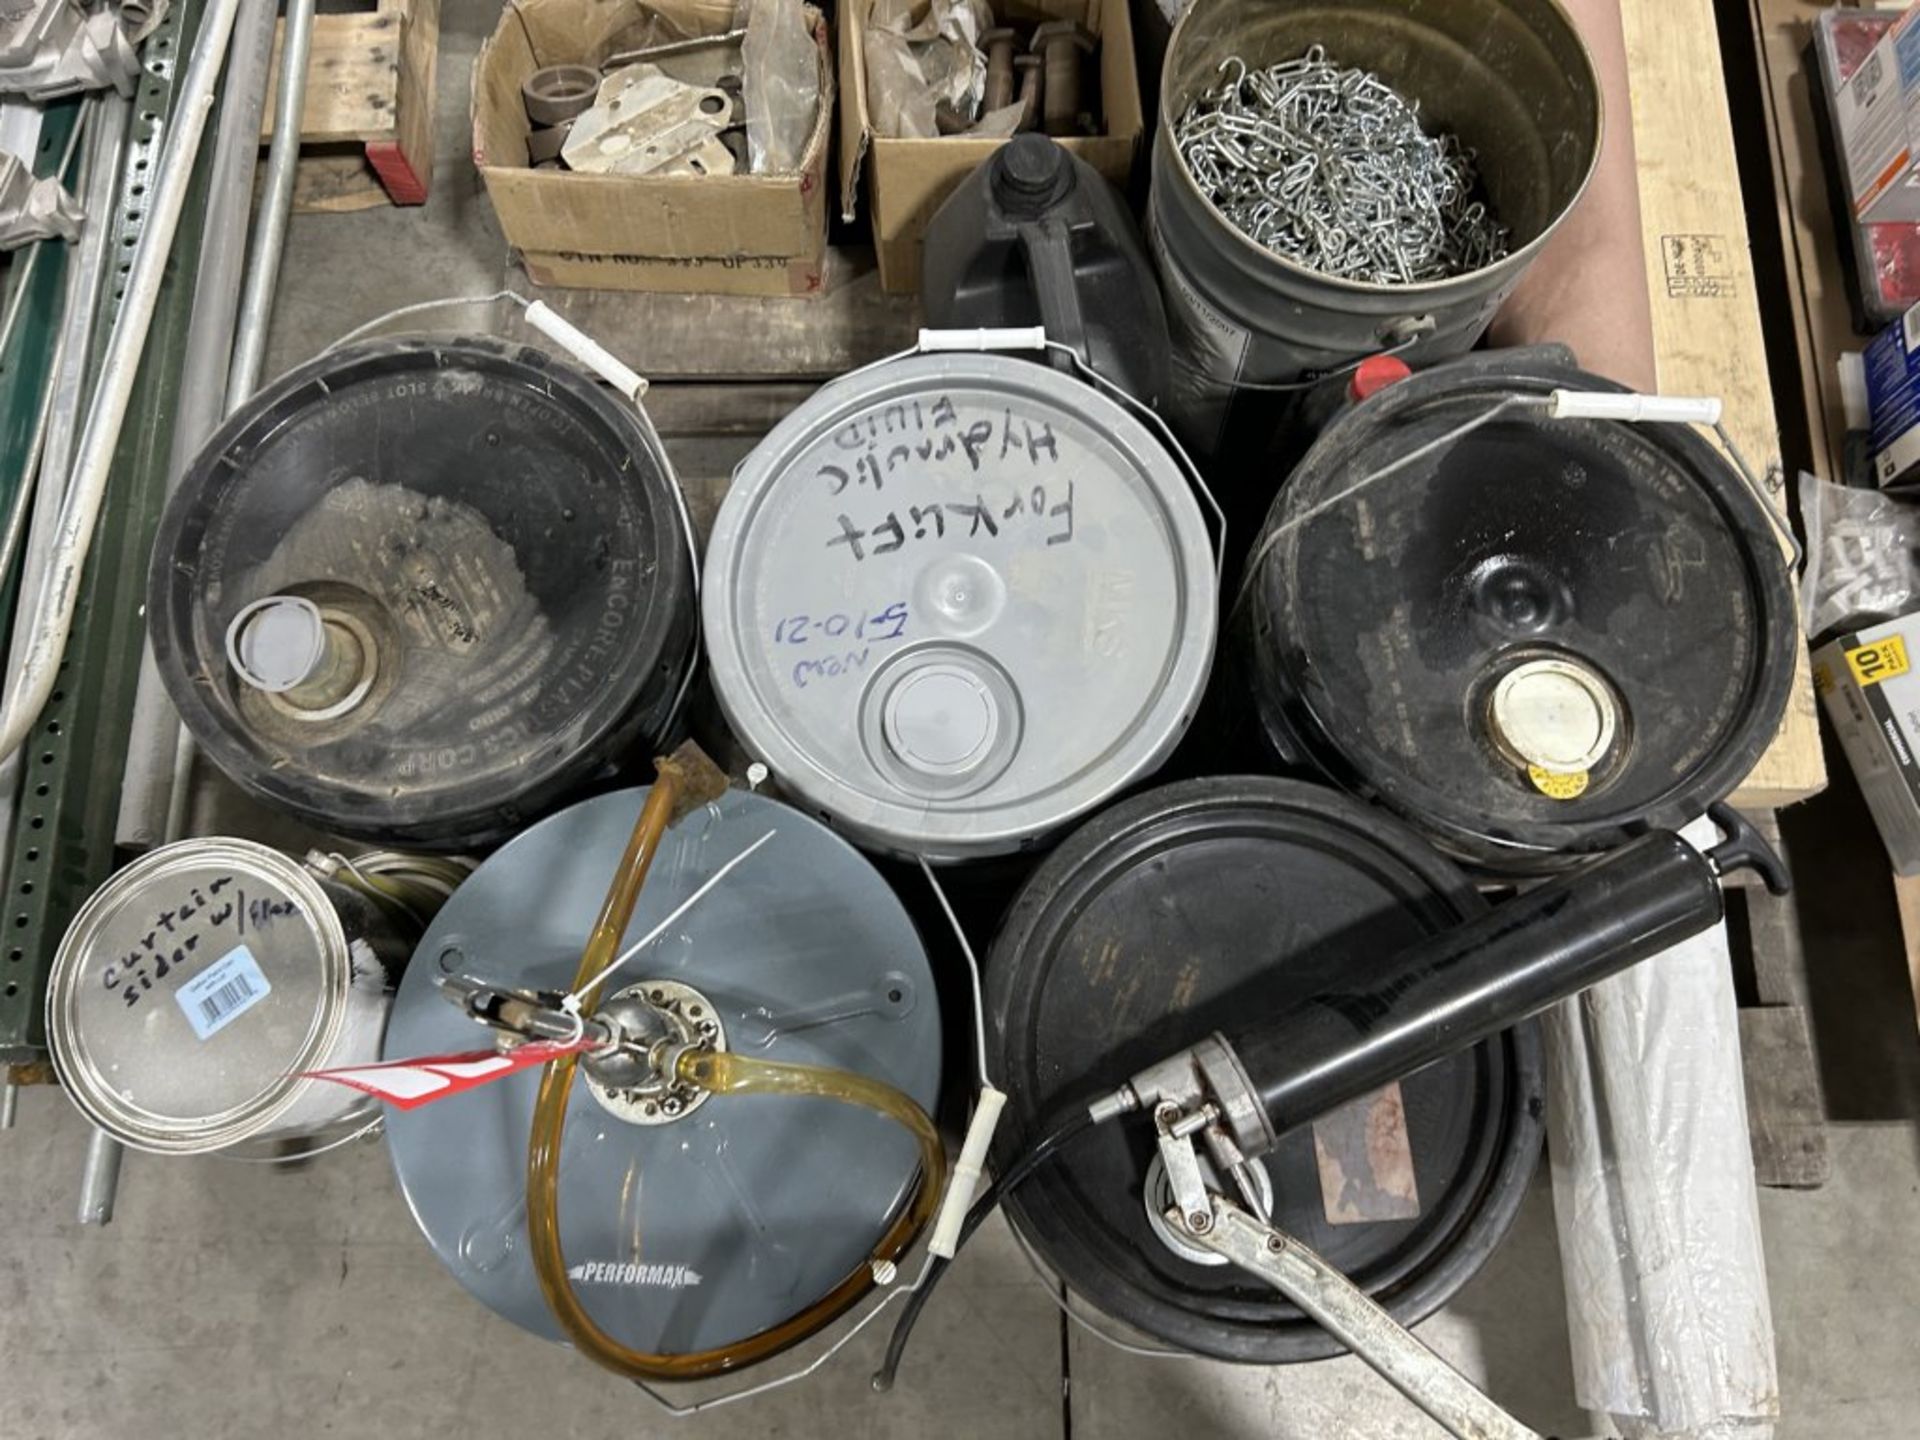 PALLET FULL OF (5) 5-GALLON BUCKETS OF HYDRAULIC OIL, BUCKET WITH CHAIN, LARGE BOLTS, ETC. - Image 3 of 8